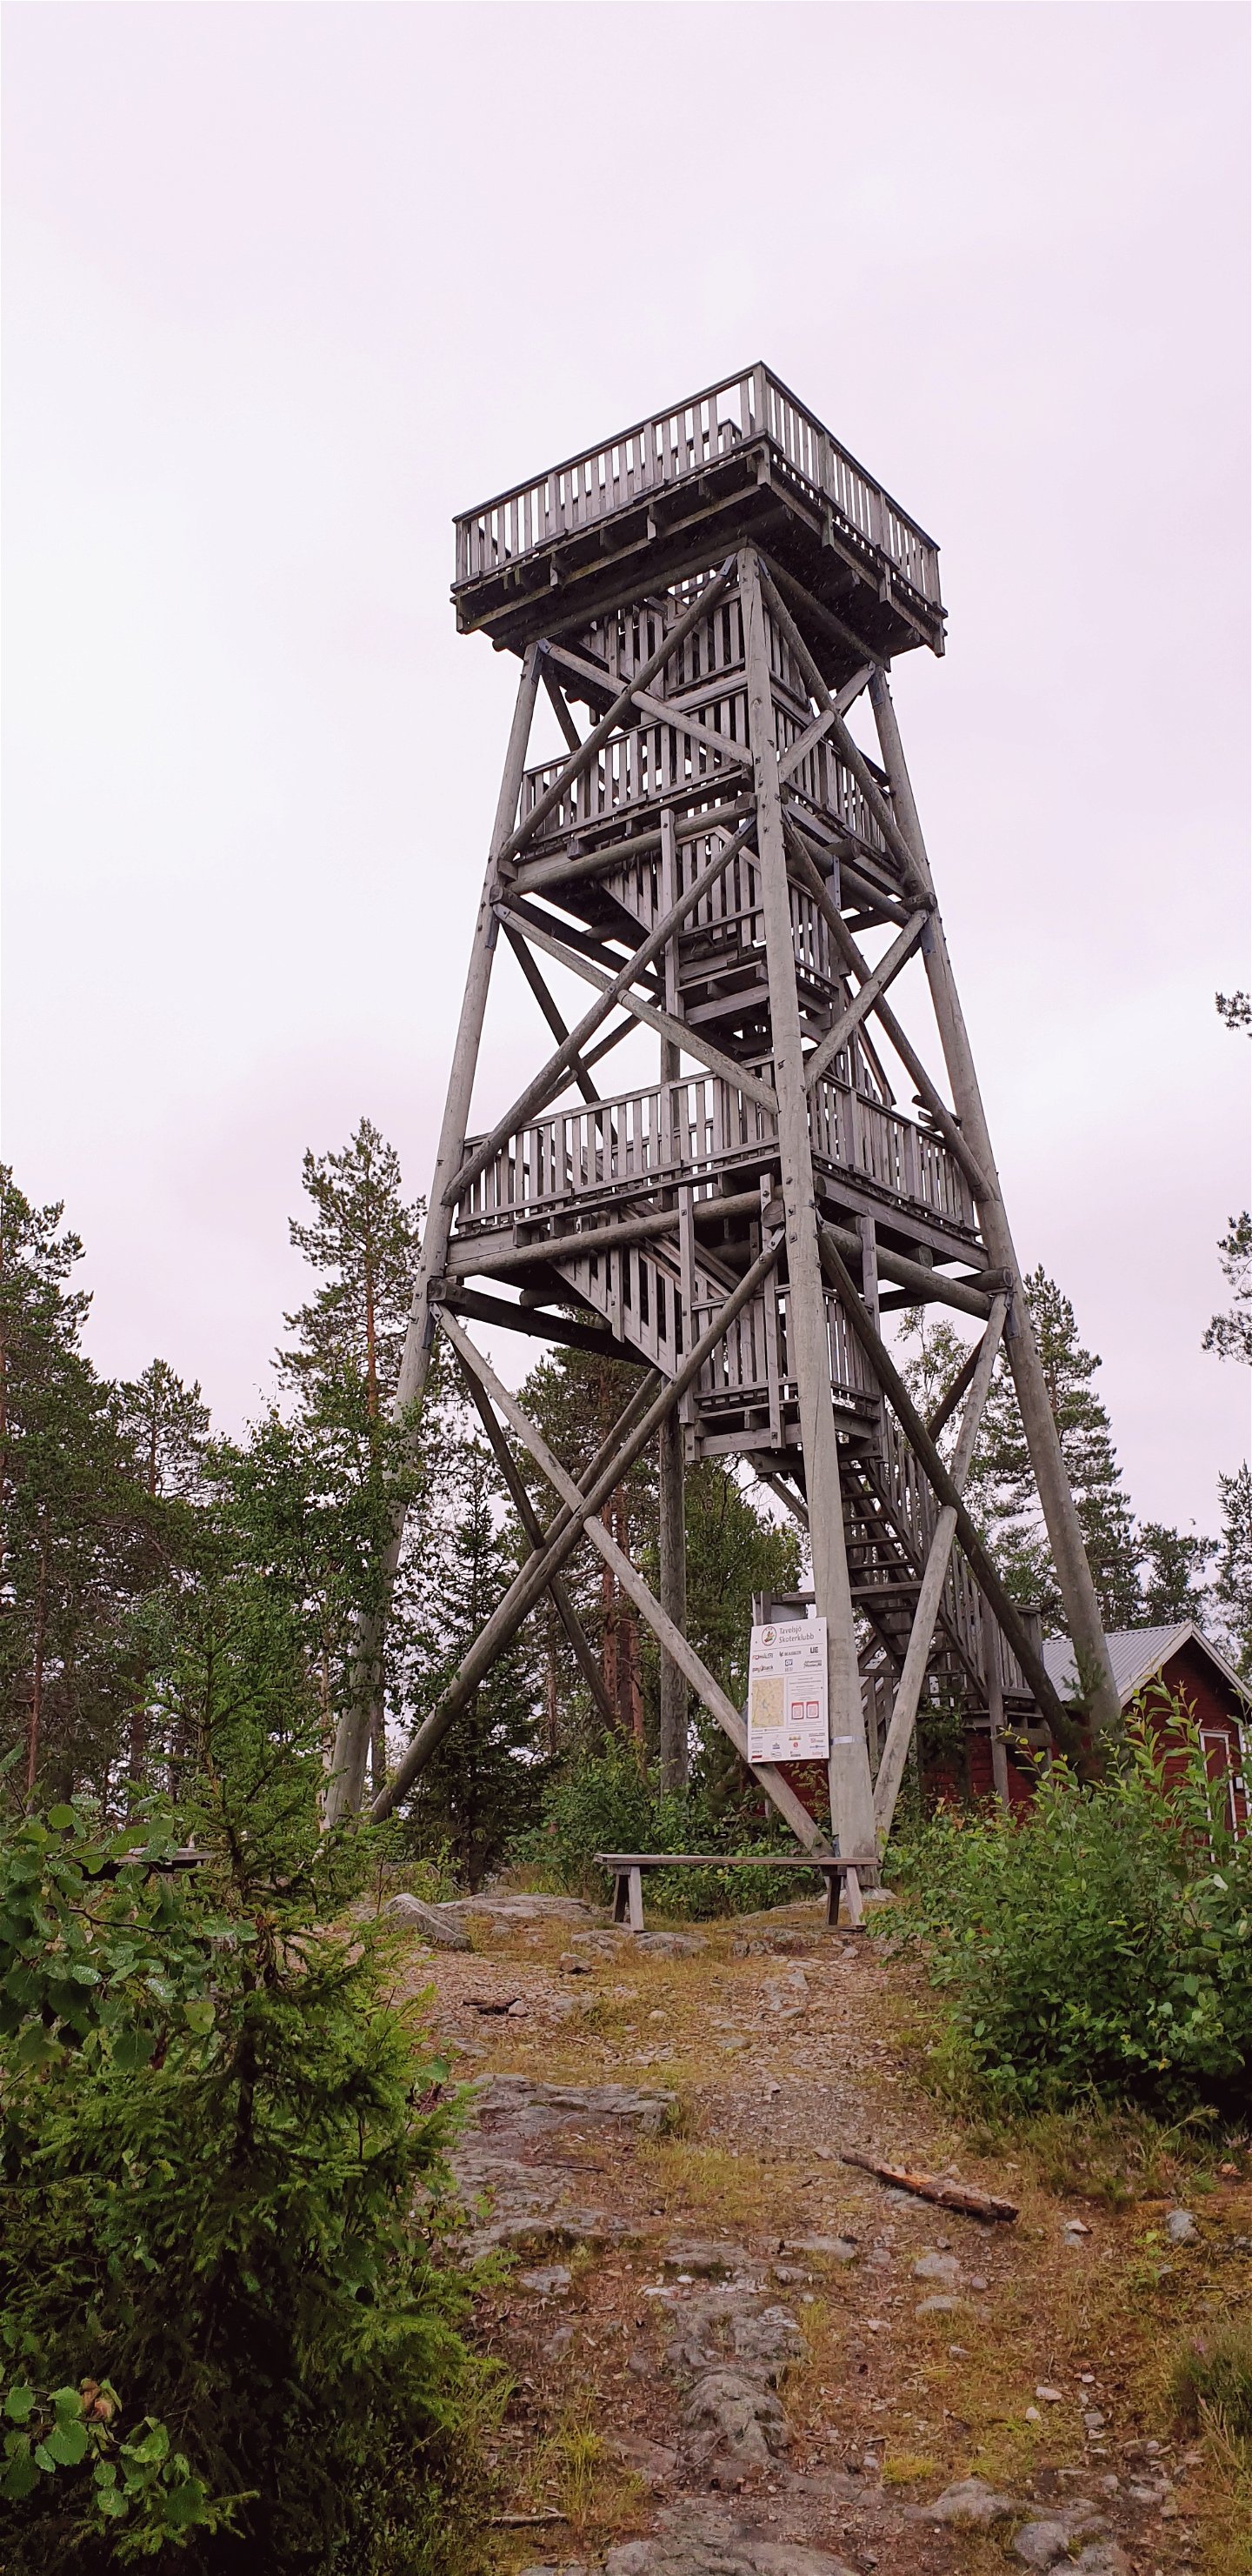 Lookout tower at Selsknösen.